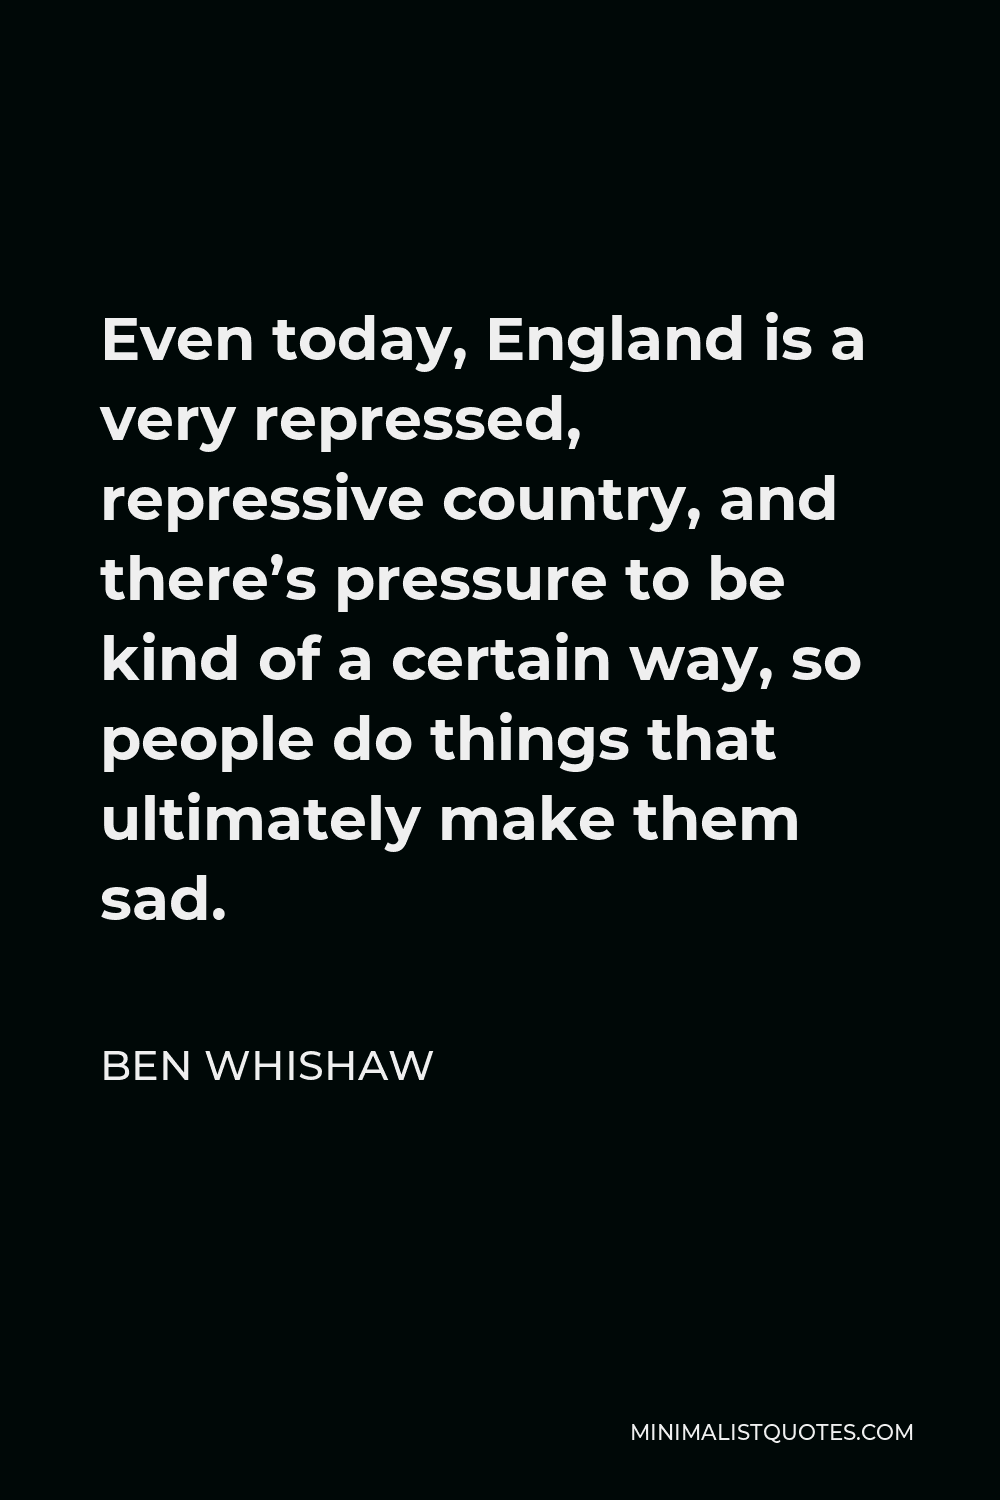 Ben Whishaw Quote - Even today, England is a very repressed, repressive country, and there’s pressure to be kind of a certain way, so people do things that ultimately make them sad.